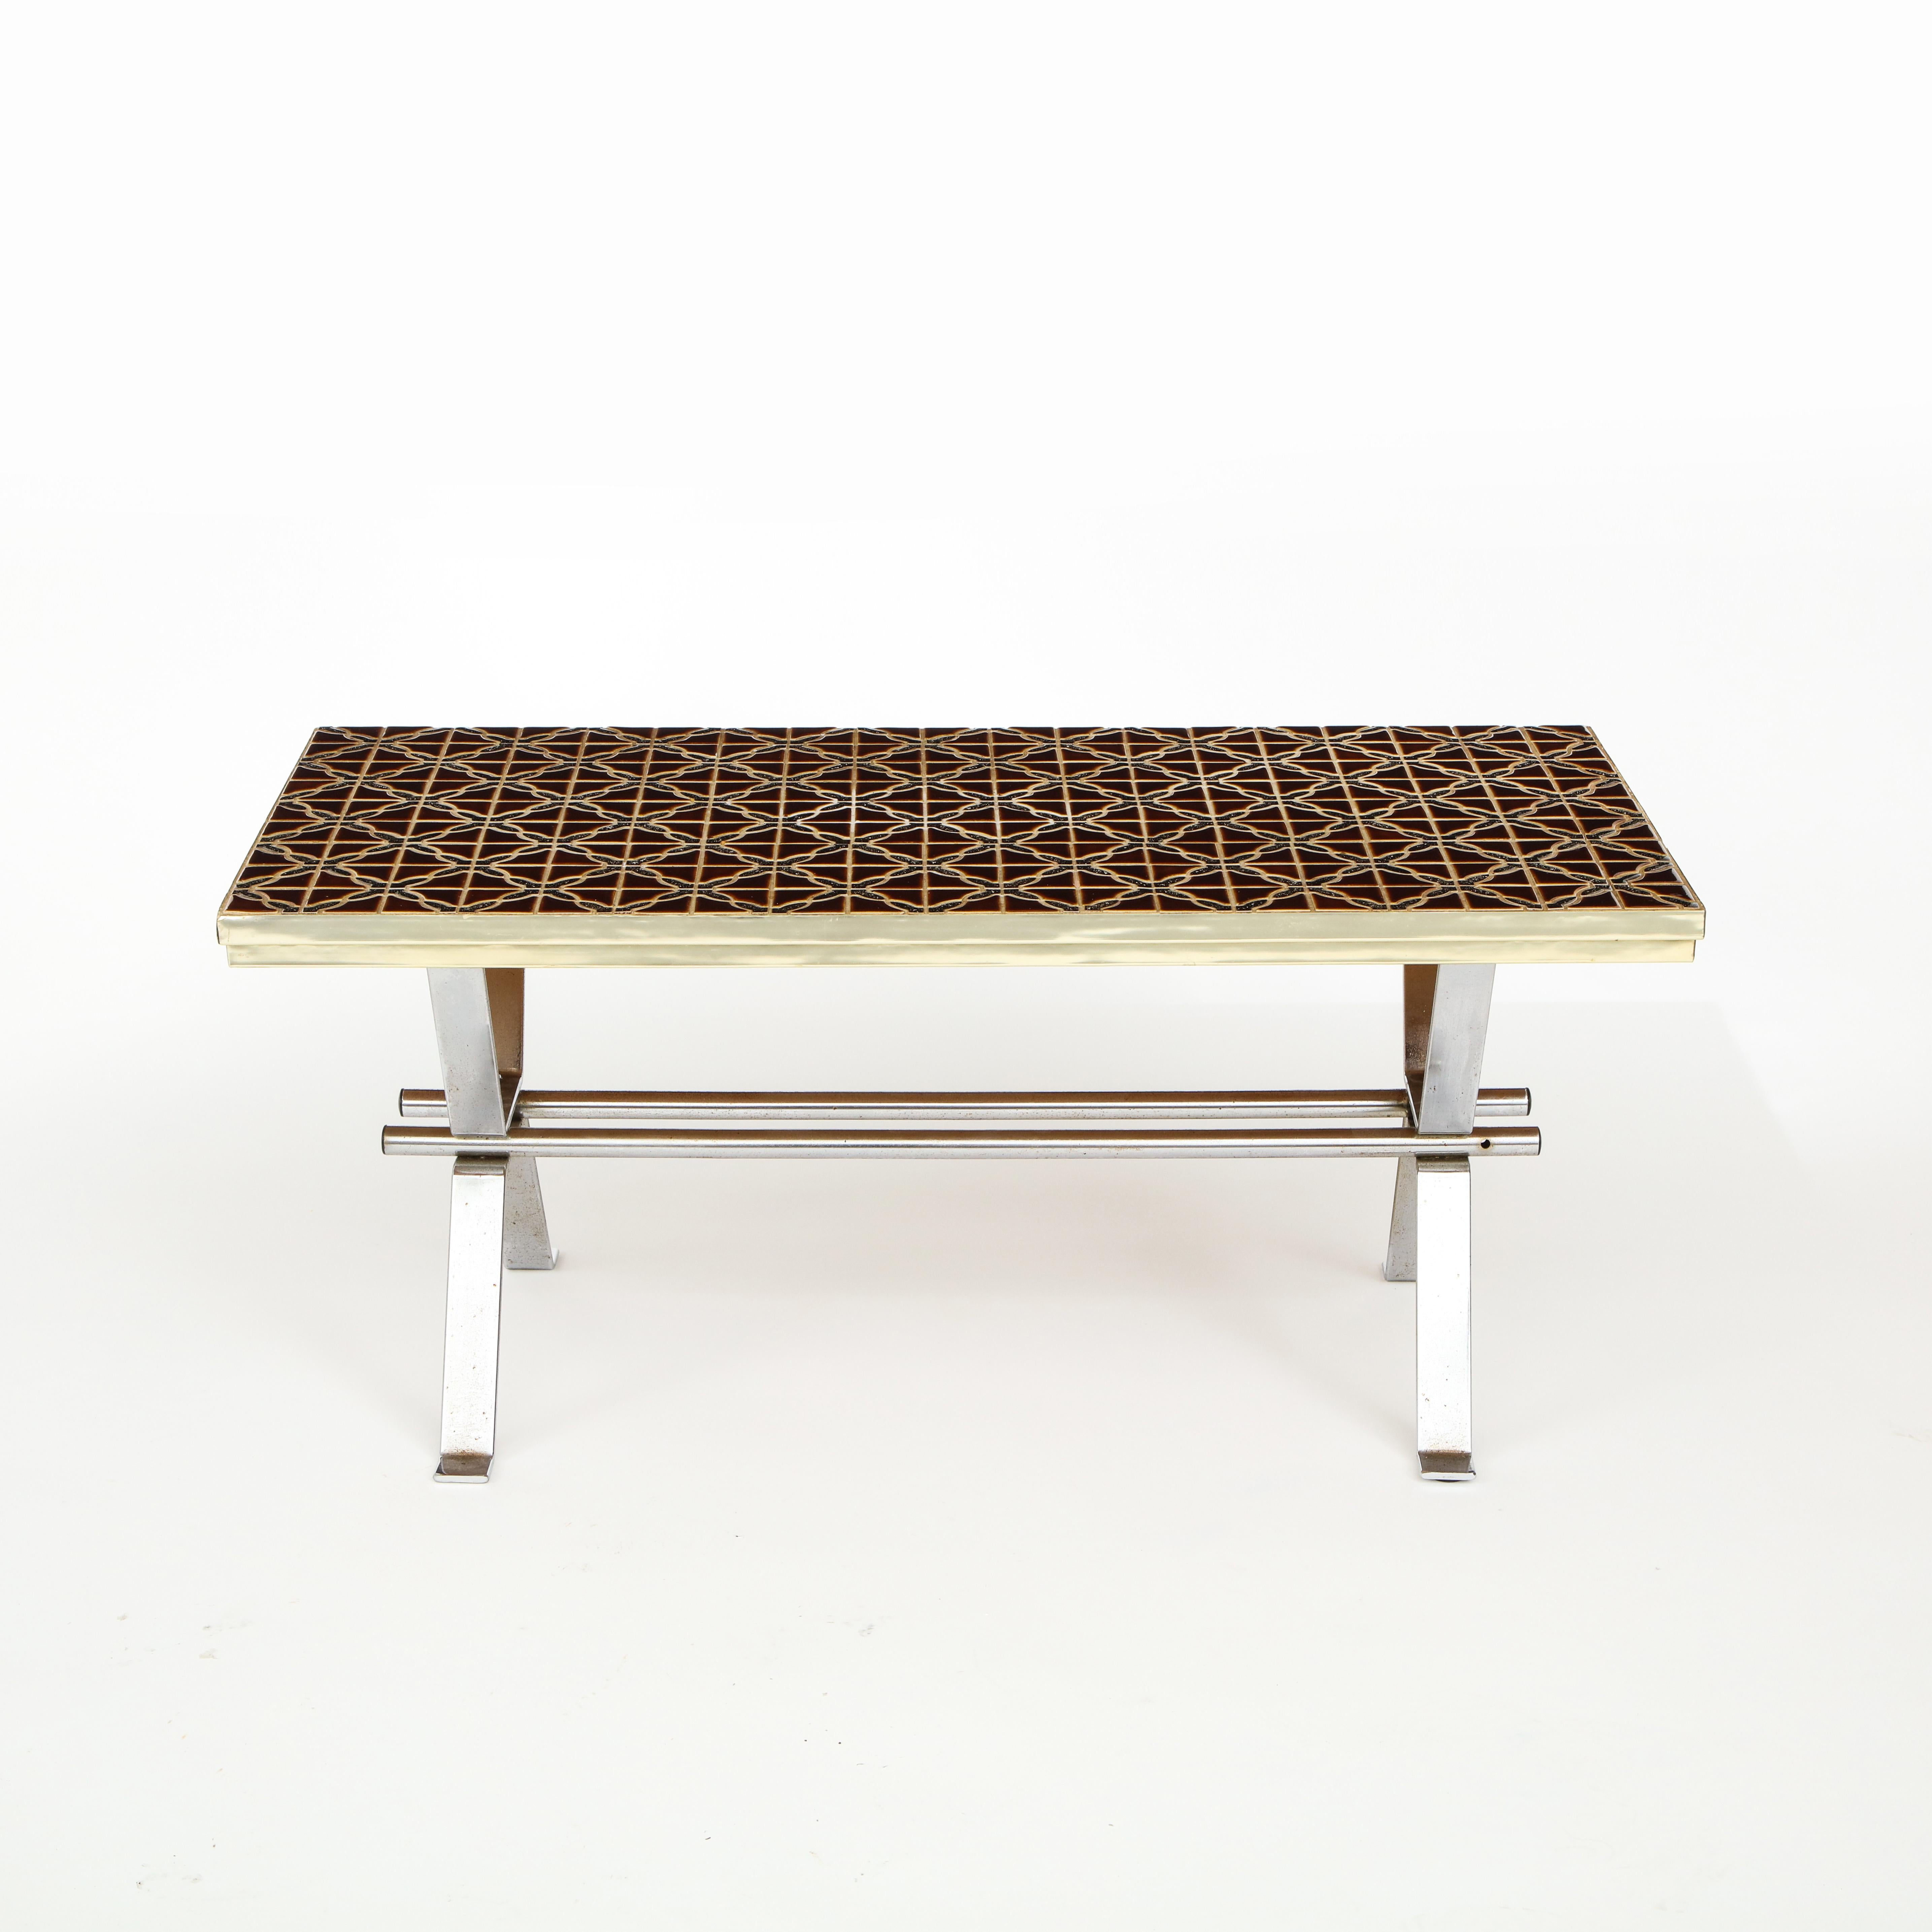 Handsome table with a mosaic top. Geometric pattern rendered in a rich glaze. Brass banding frames the top. An elegant metal base is in a contrasting finish.